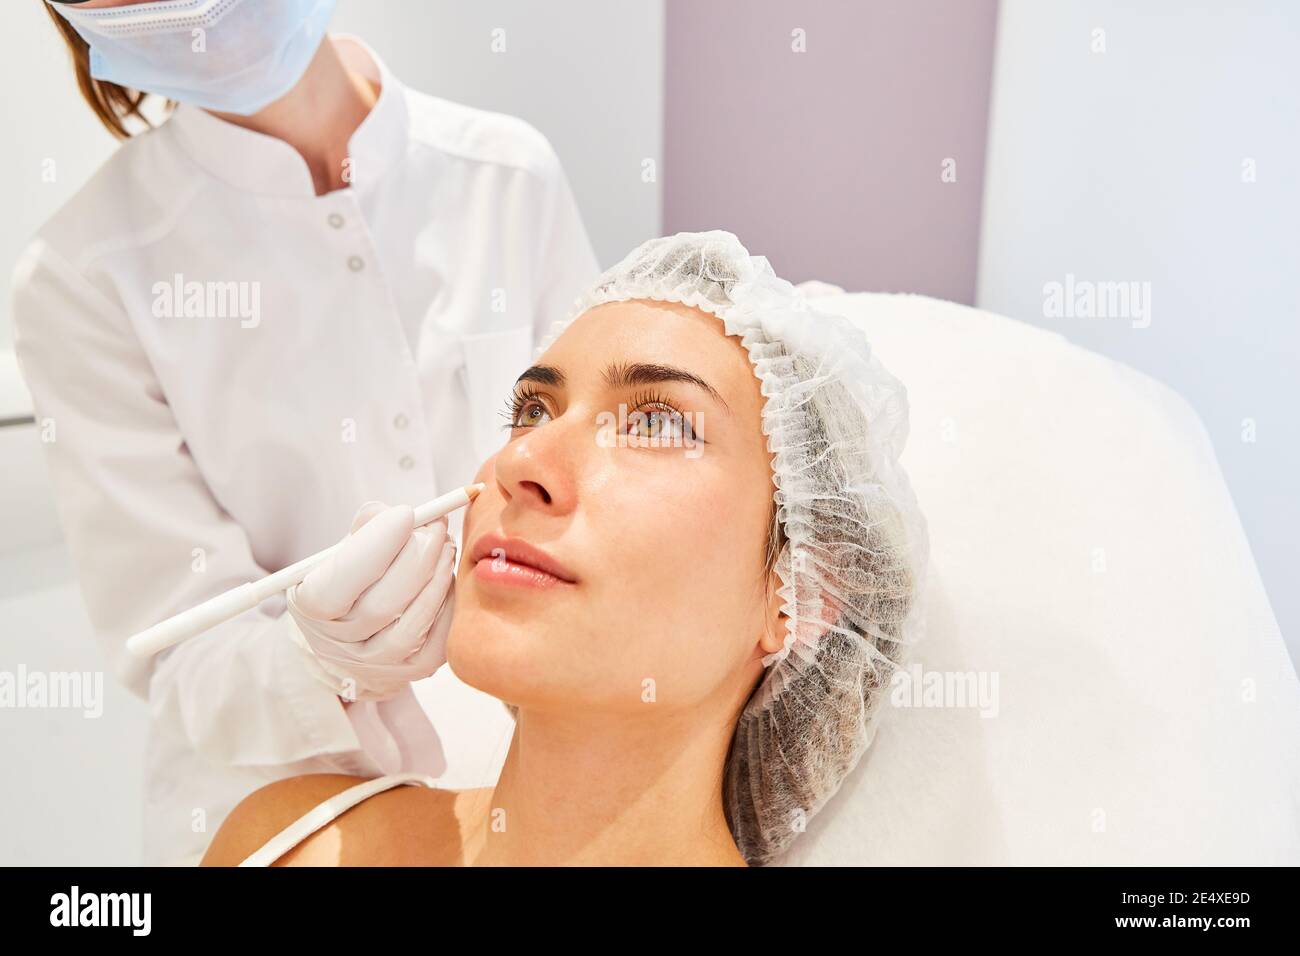 The patient receives hyaluronic acid dermal fillers to reduce wrinkles from the dermatologist Stock Photo